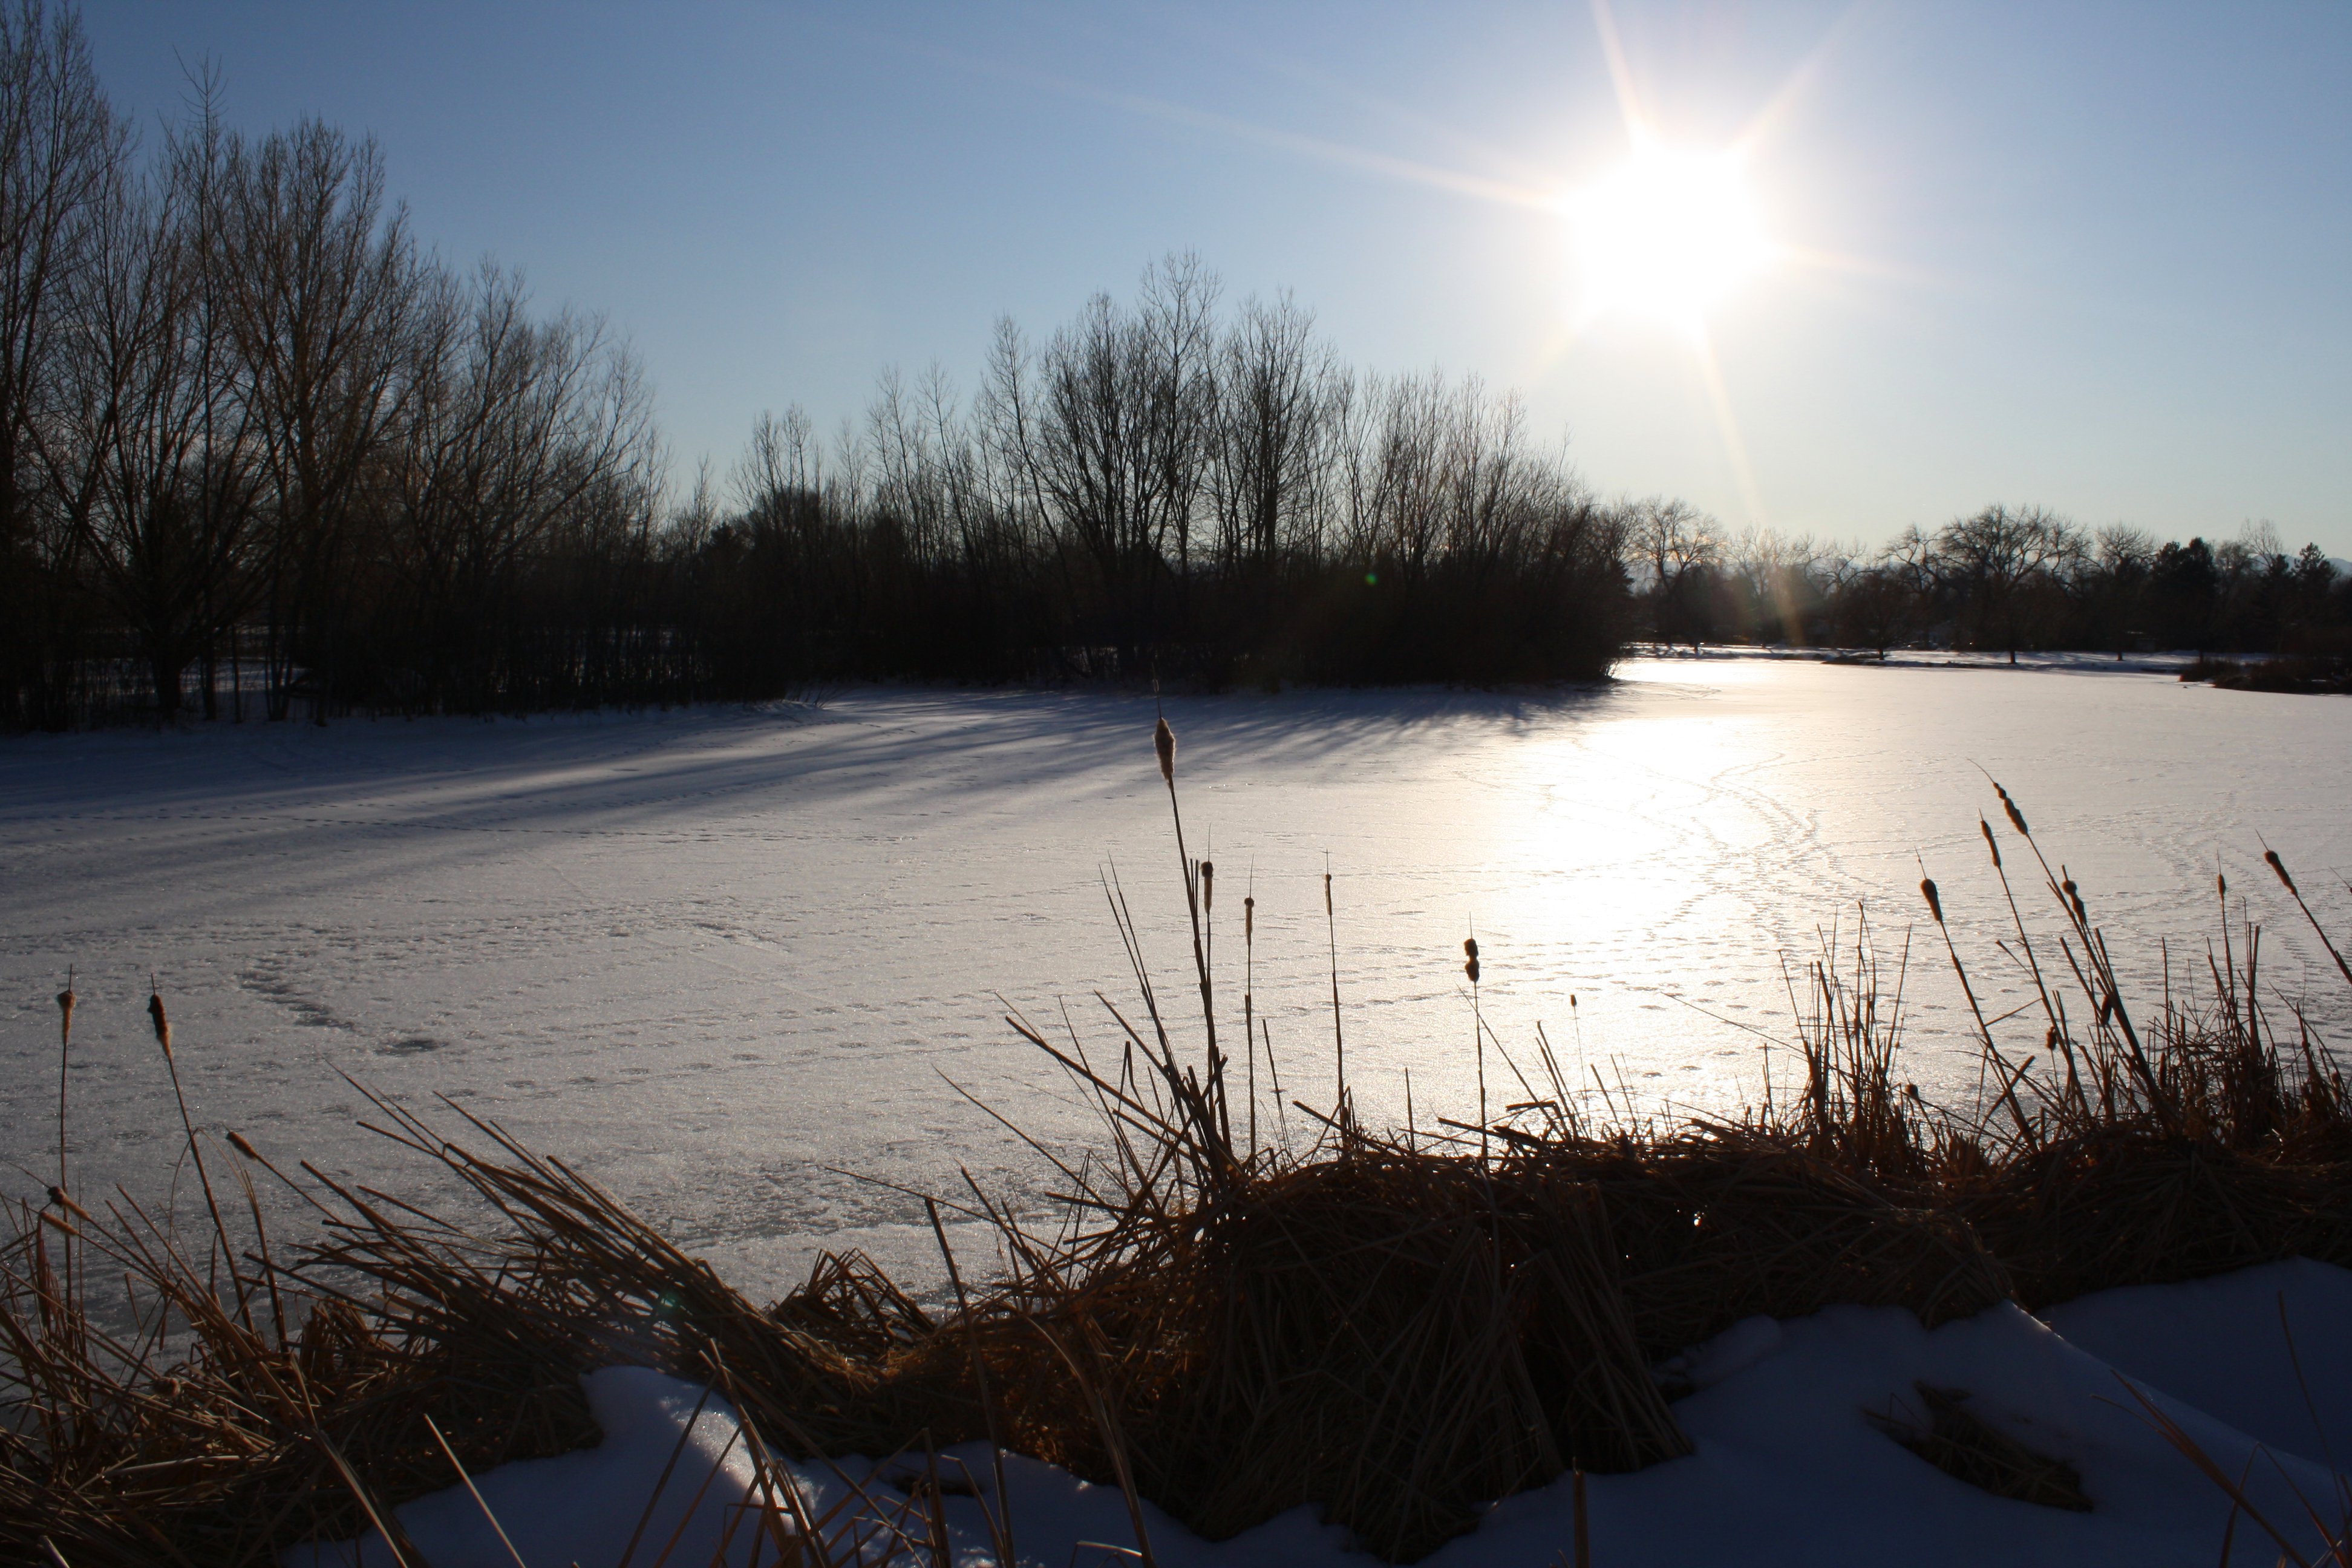 Bright Sun over Frozen Pond Picture | Free Photograph | Photos ...